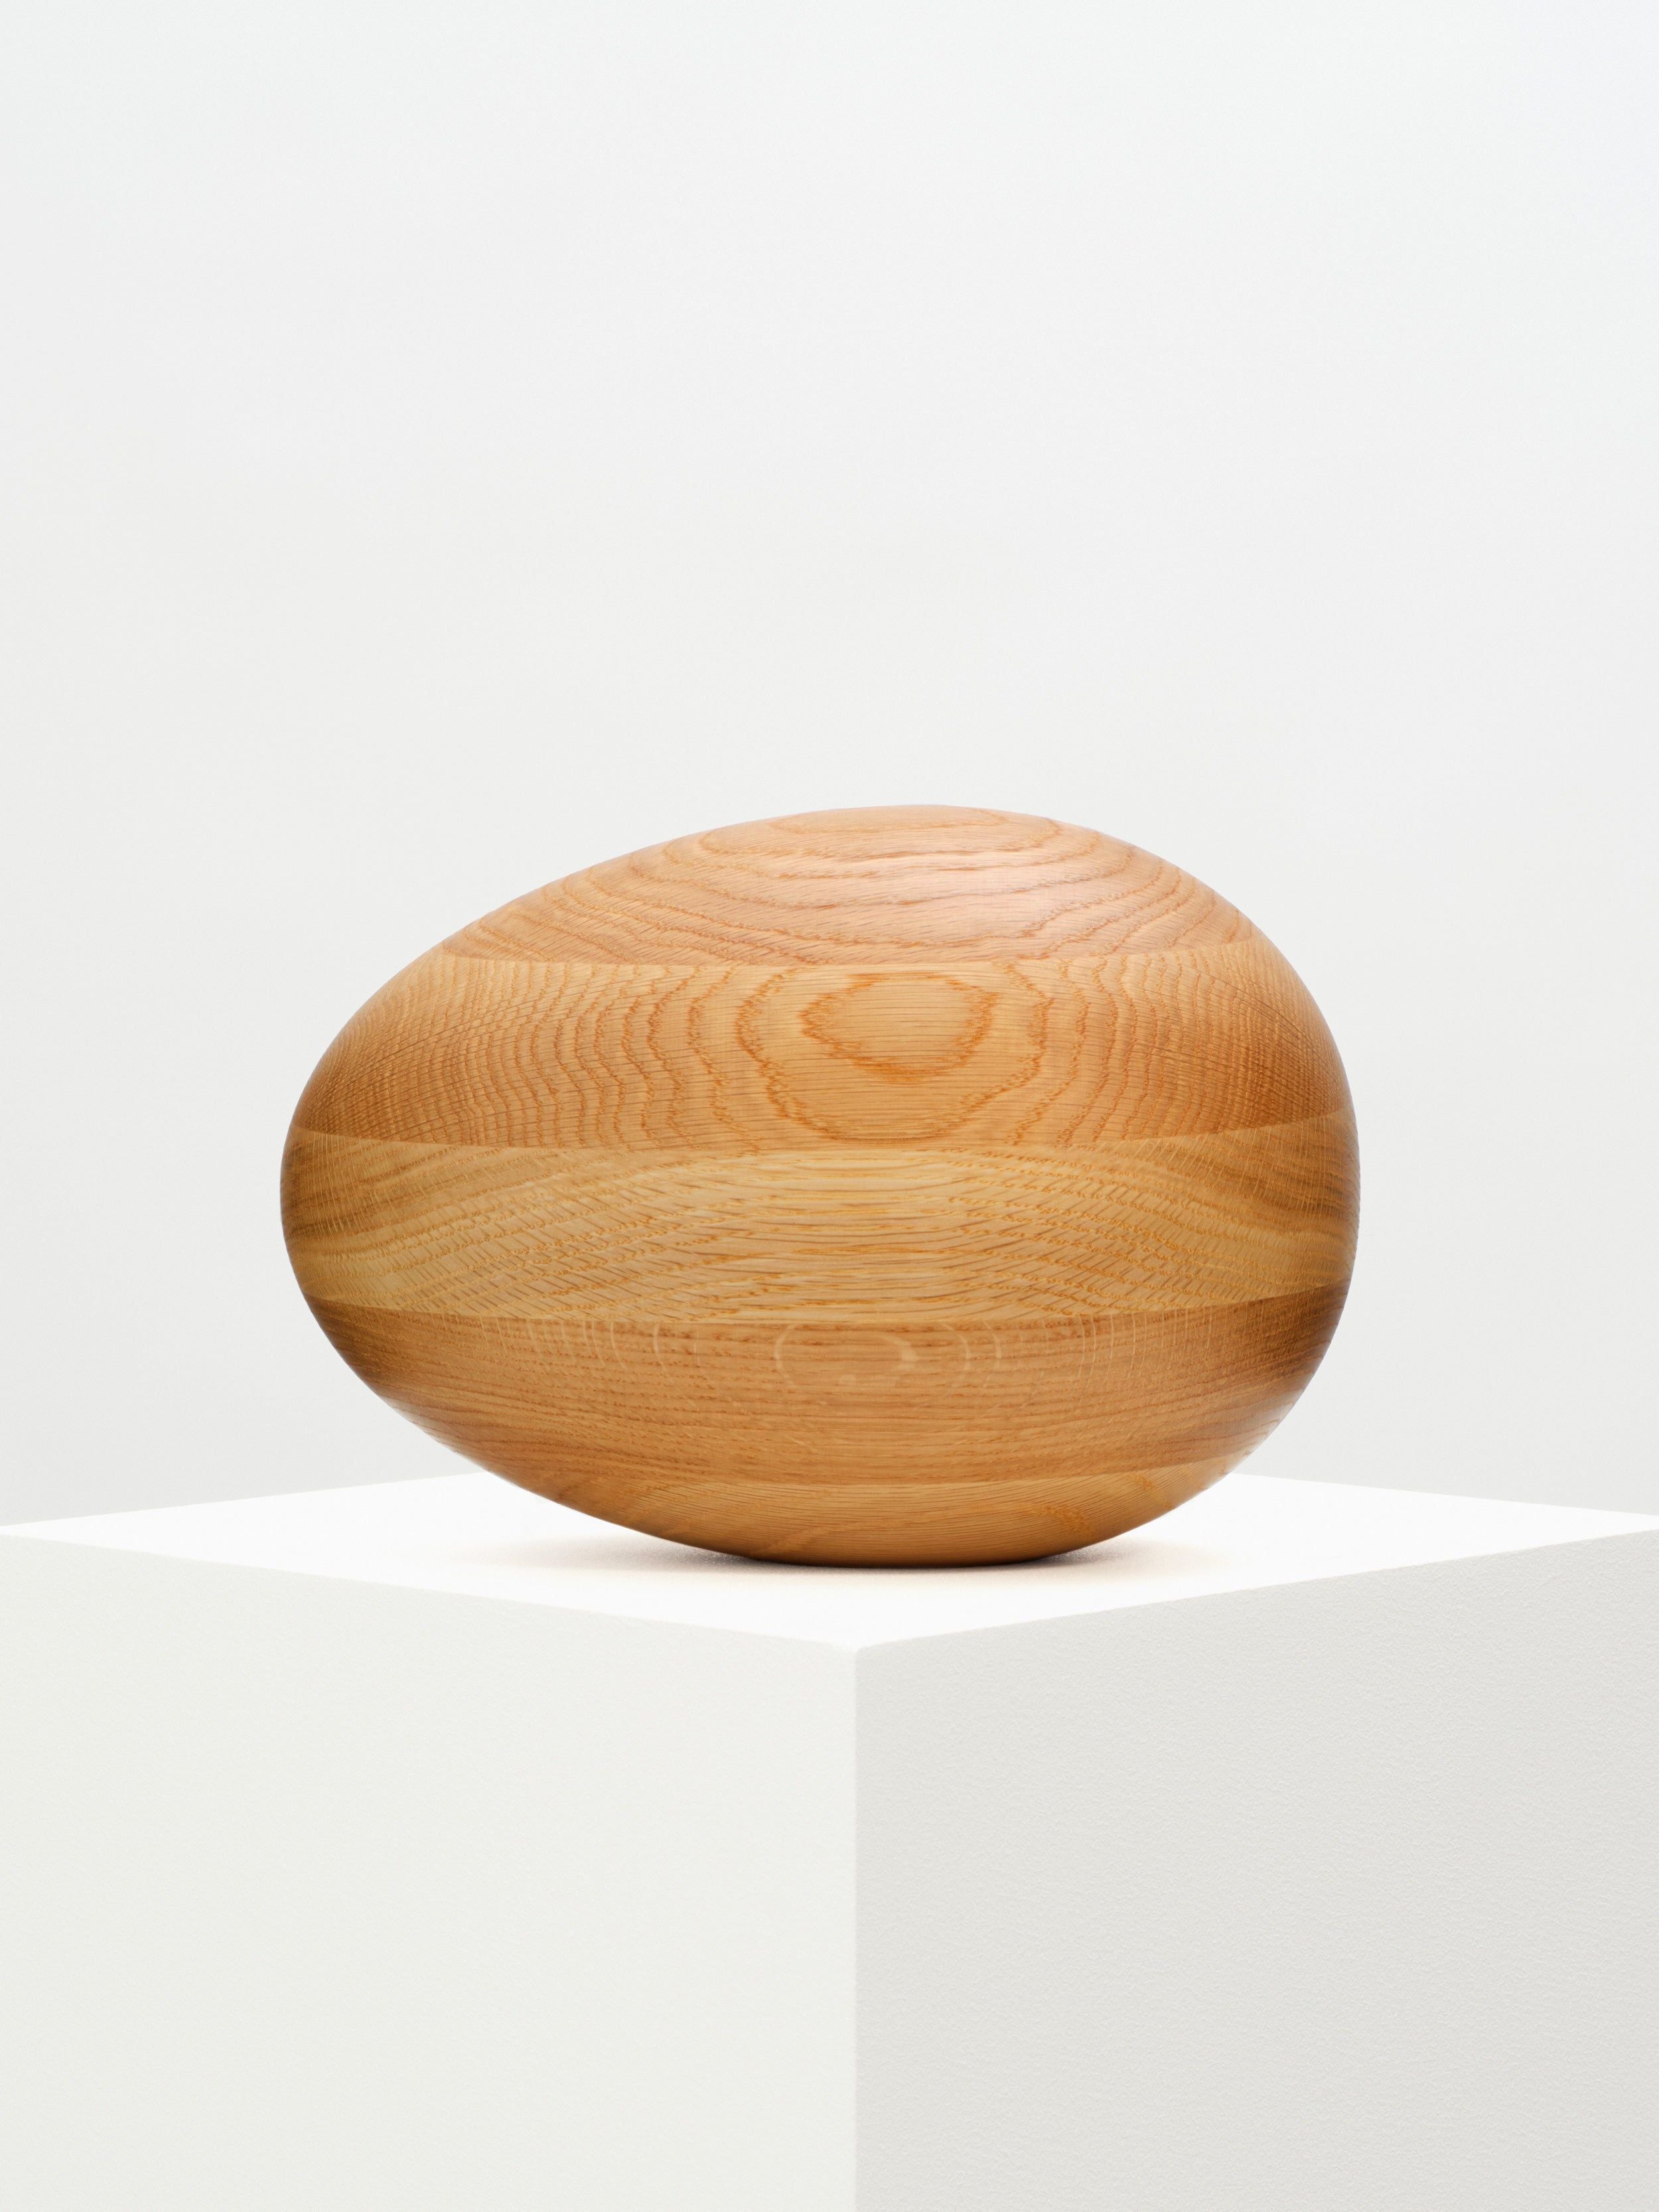  Close-up image of a Natural Oak Egg Sculpture, showcasing the beautiful and intricate wood grain and natural finish, ideal for home decor and gifting